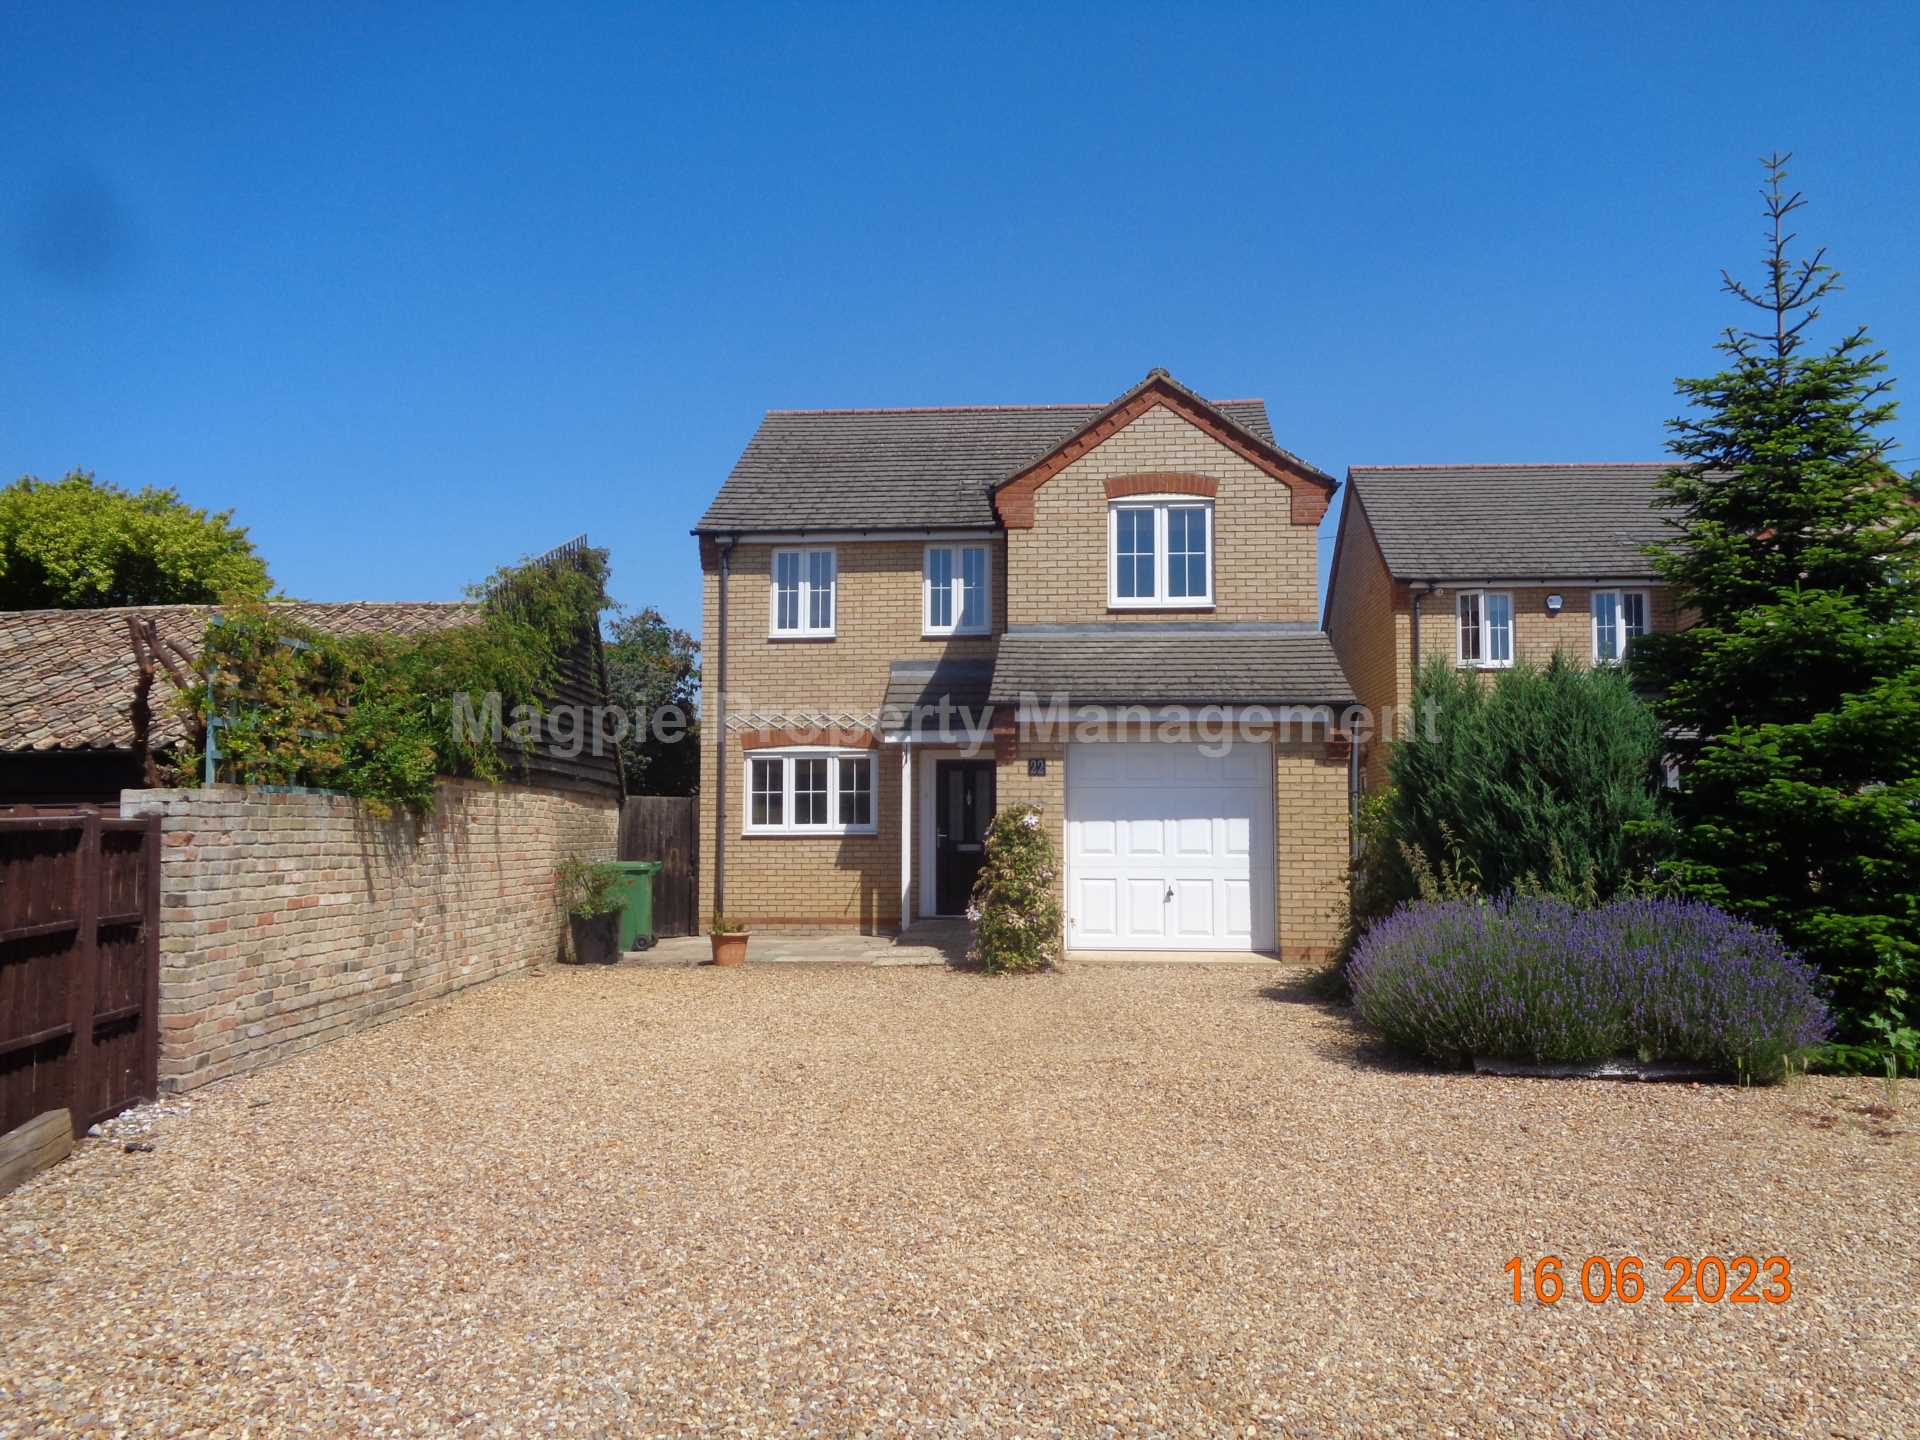 4 bed Detached House for rent in St Neots. From Magpie Property Management - St Neots